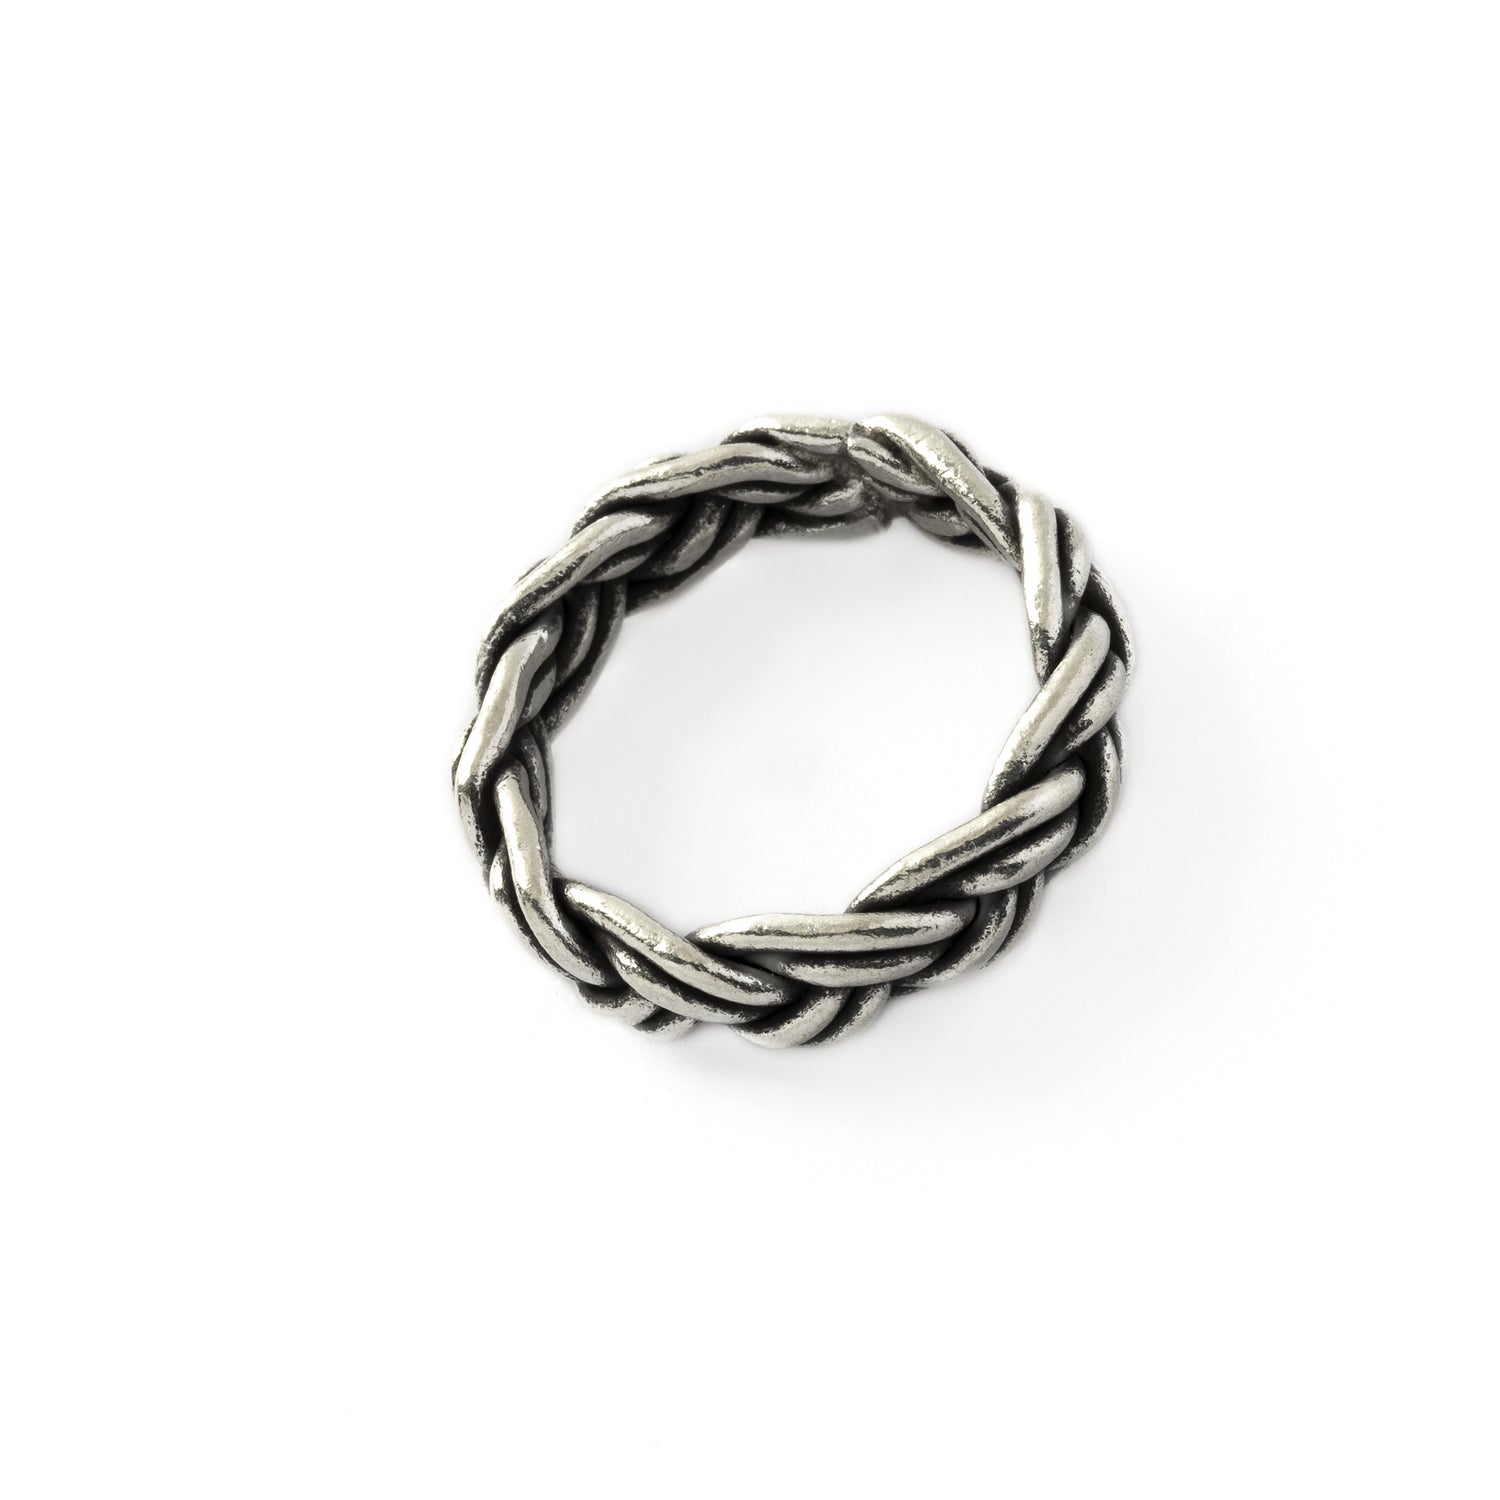 Tribal Silver Braided Band Ring right side view